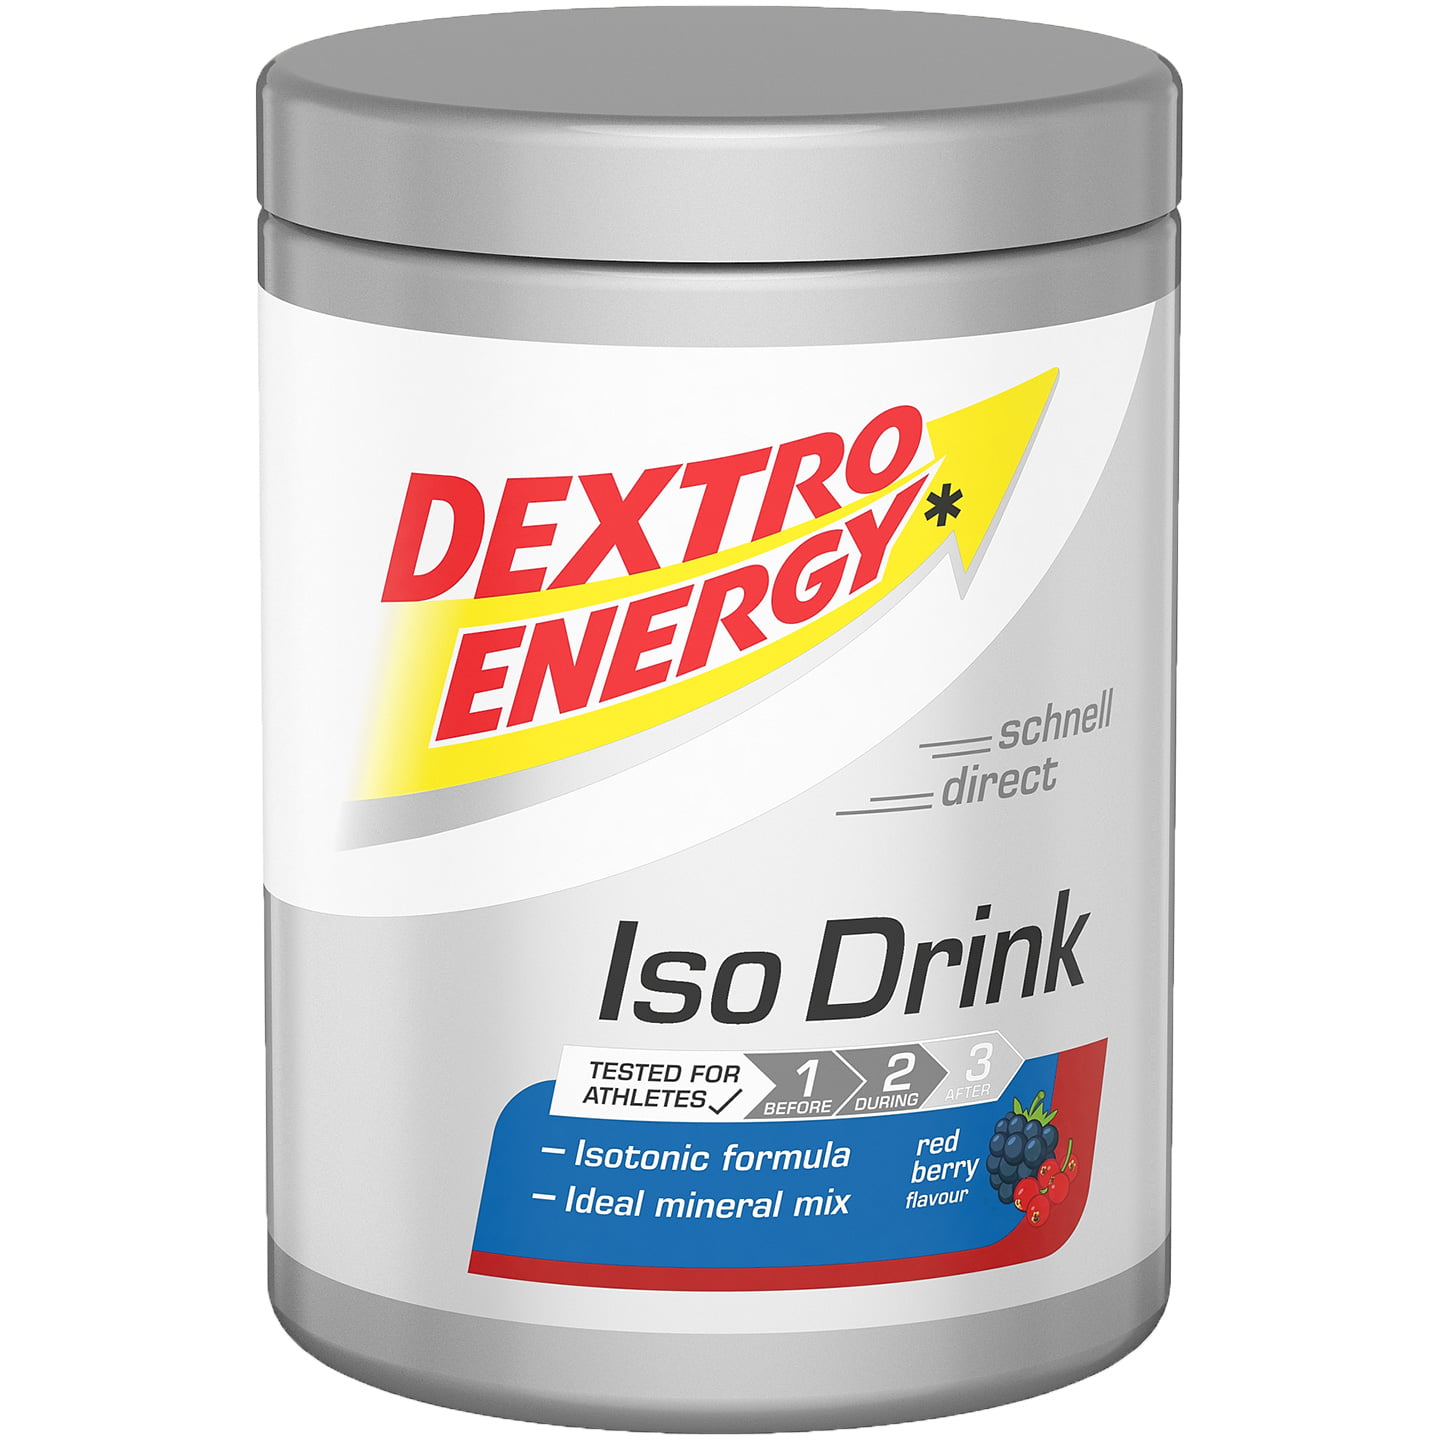 DEXTRO ENERGY Iso Red Berry Lt. Edition Drink, Power drink, Sports food